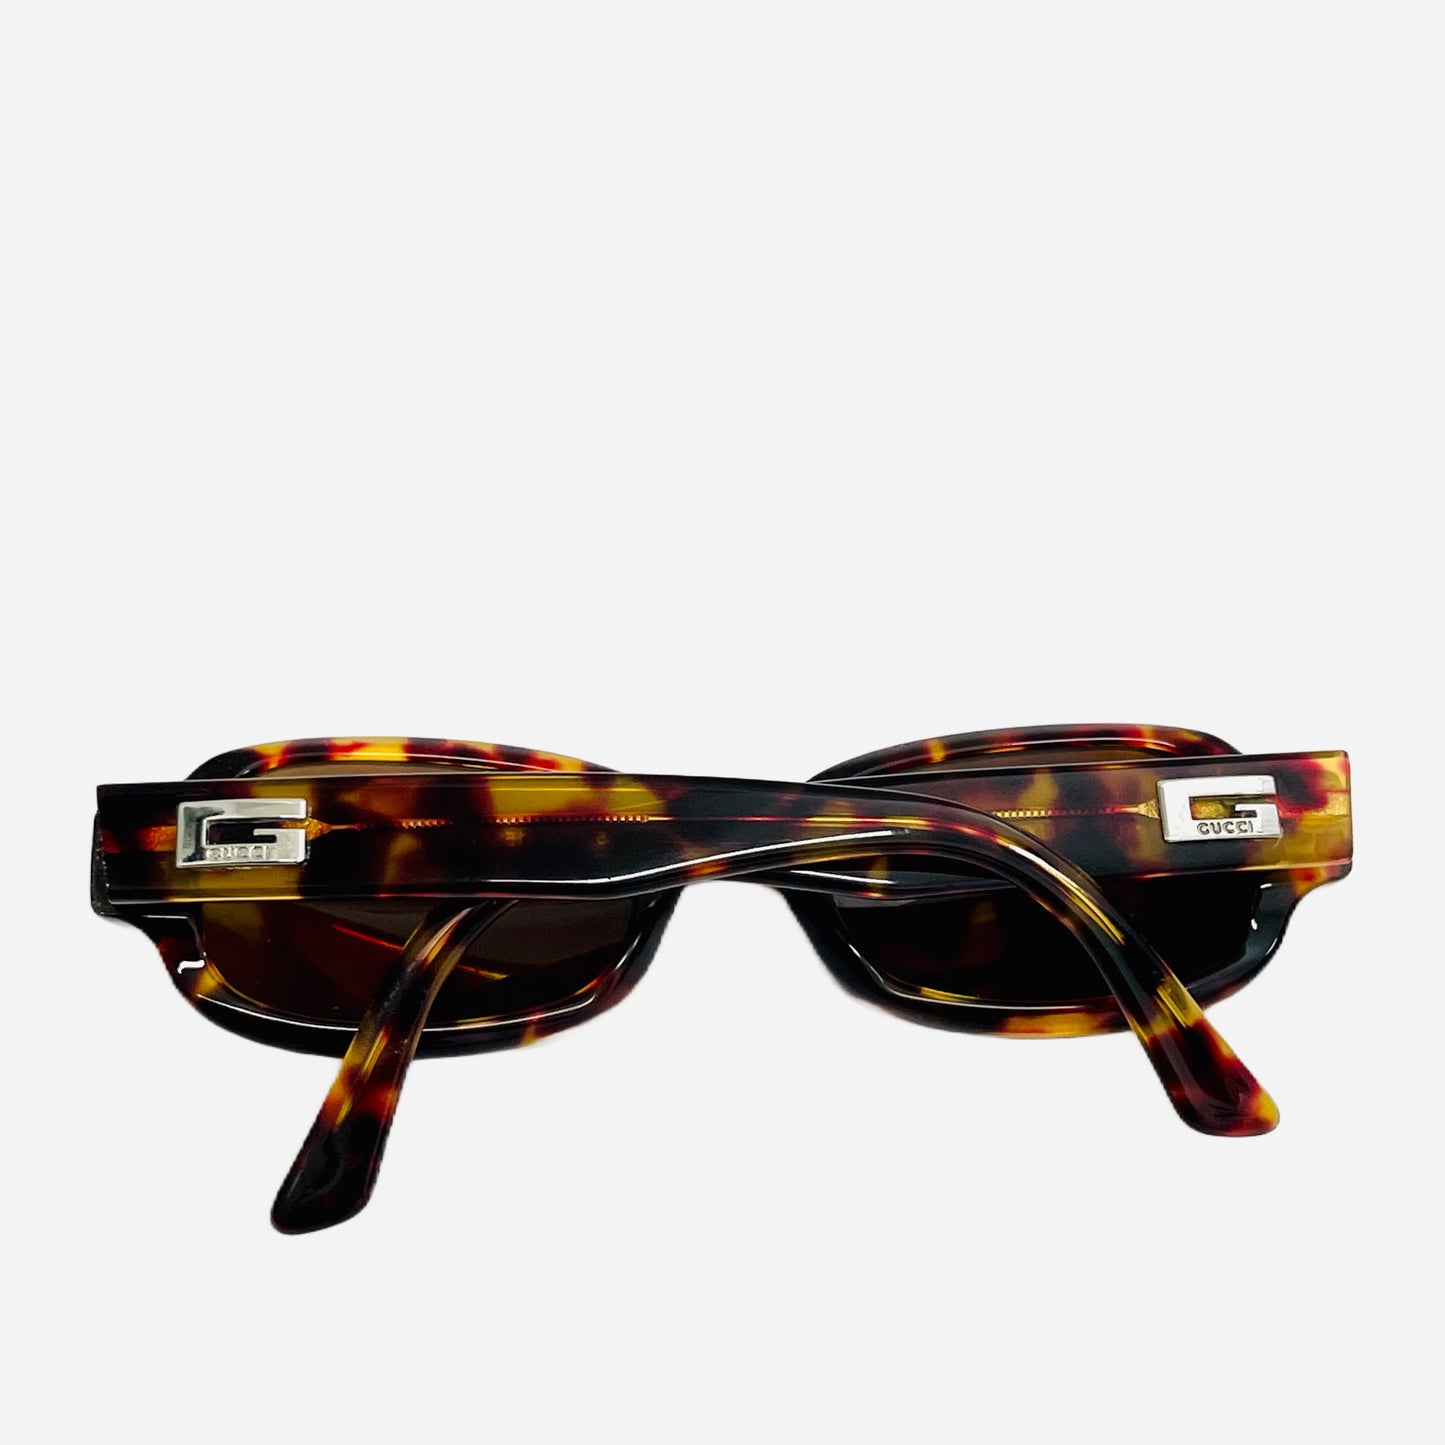 Vintage-Gucci-Sunglasses-Sonnenbrille-90s-1156_S-The-Seekers-back